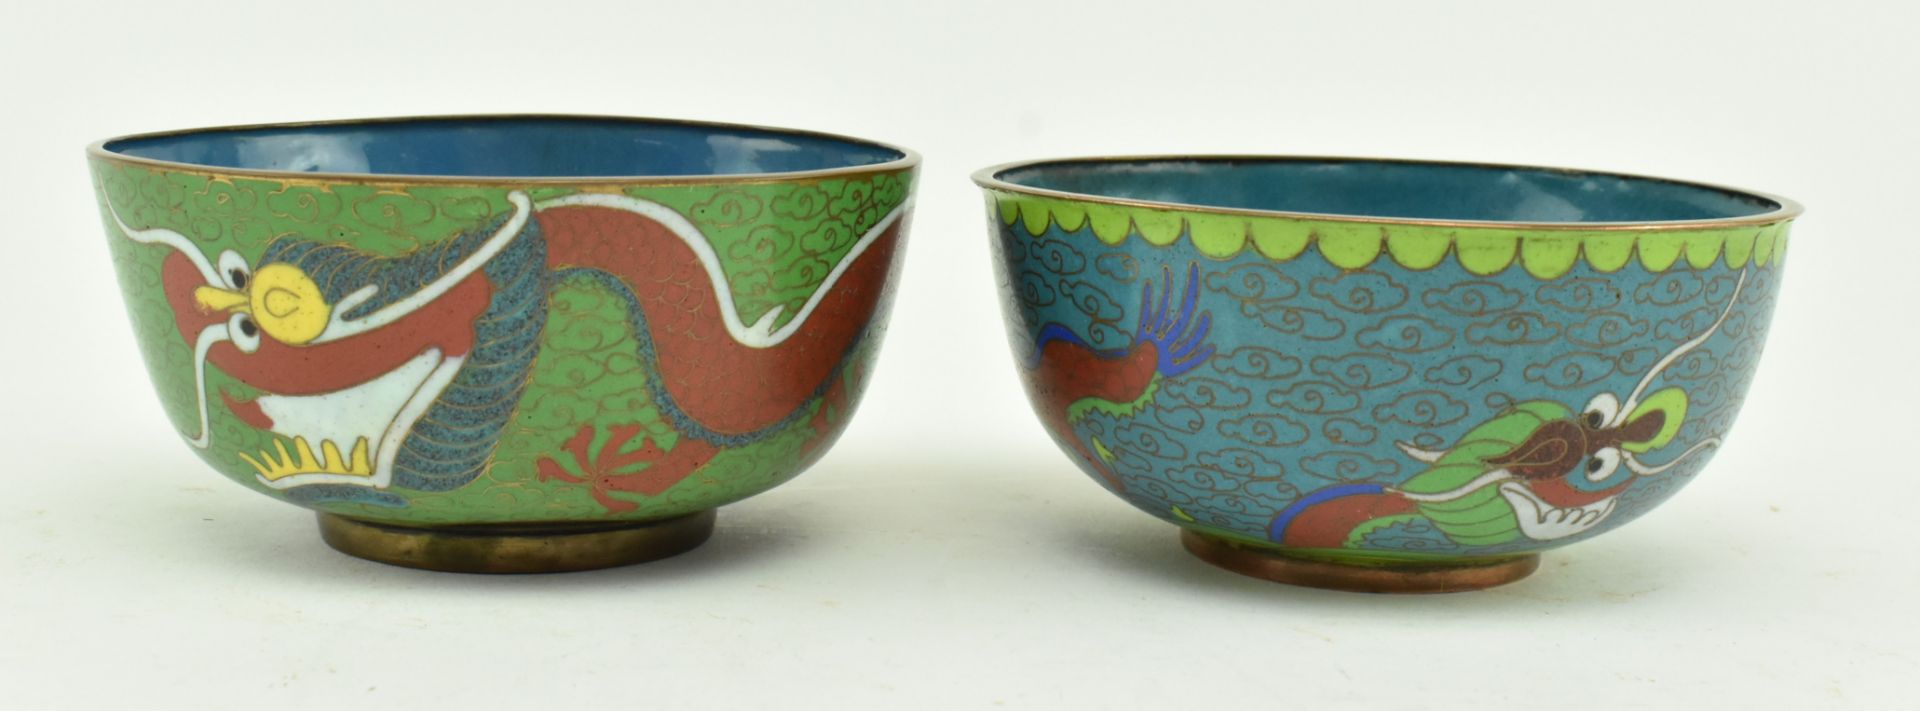 COLLECTION OF 21 CHINESE CLOISONNE BOWLS AND SAUCERS - Image 5 of 8